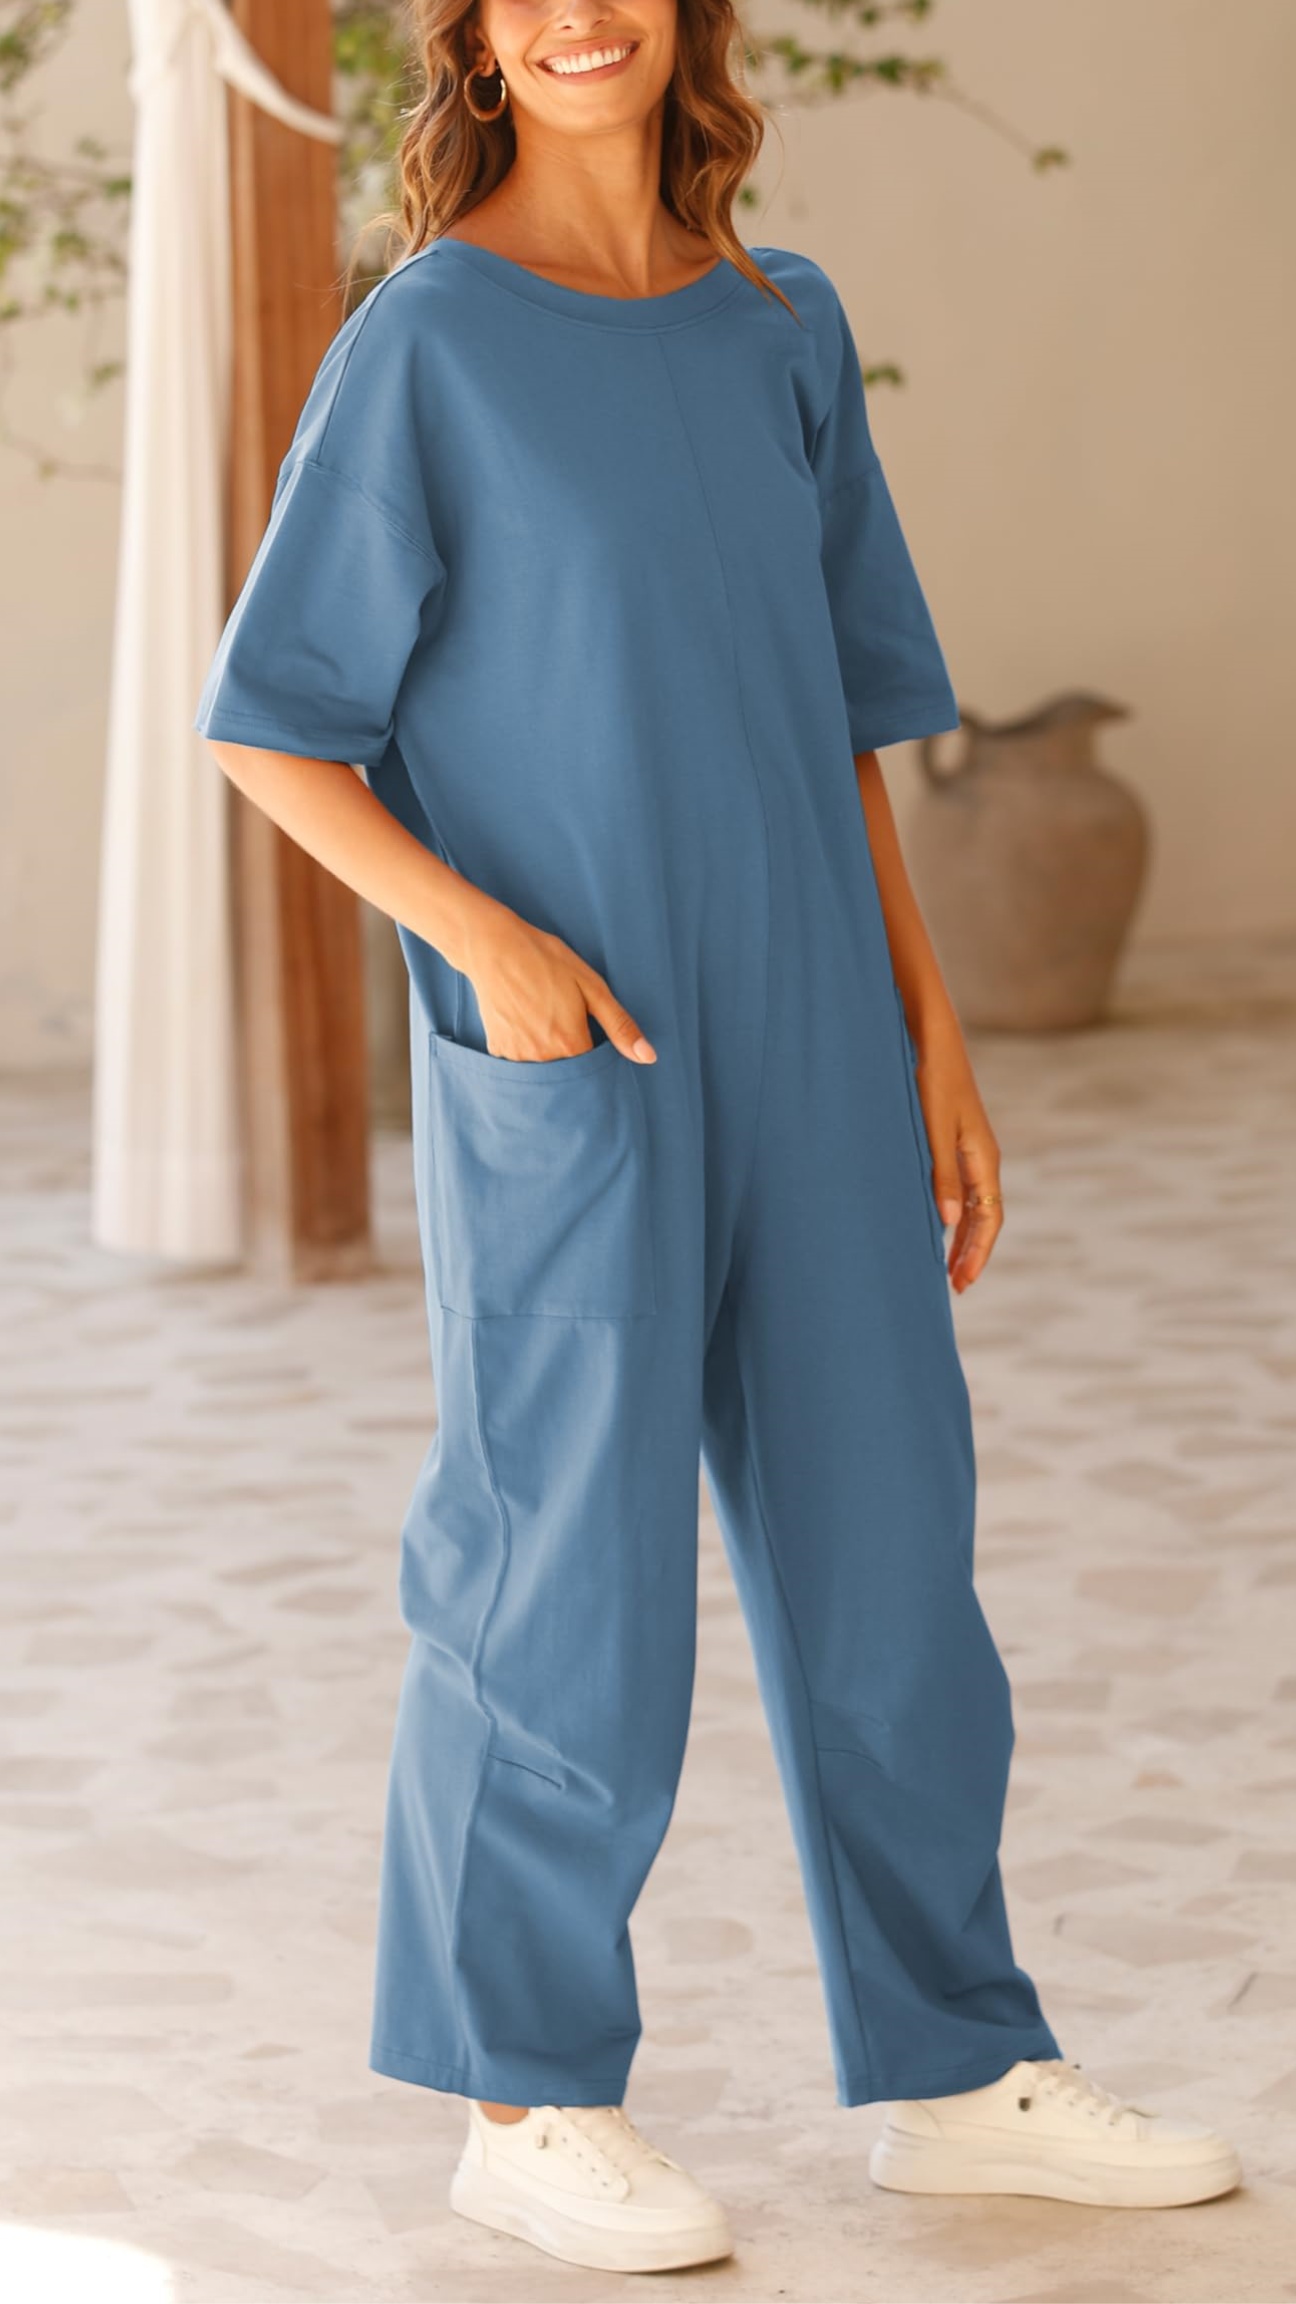 Short Sleeve Casual Jumpsuits (Buy 2 Free Shipping)